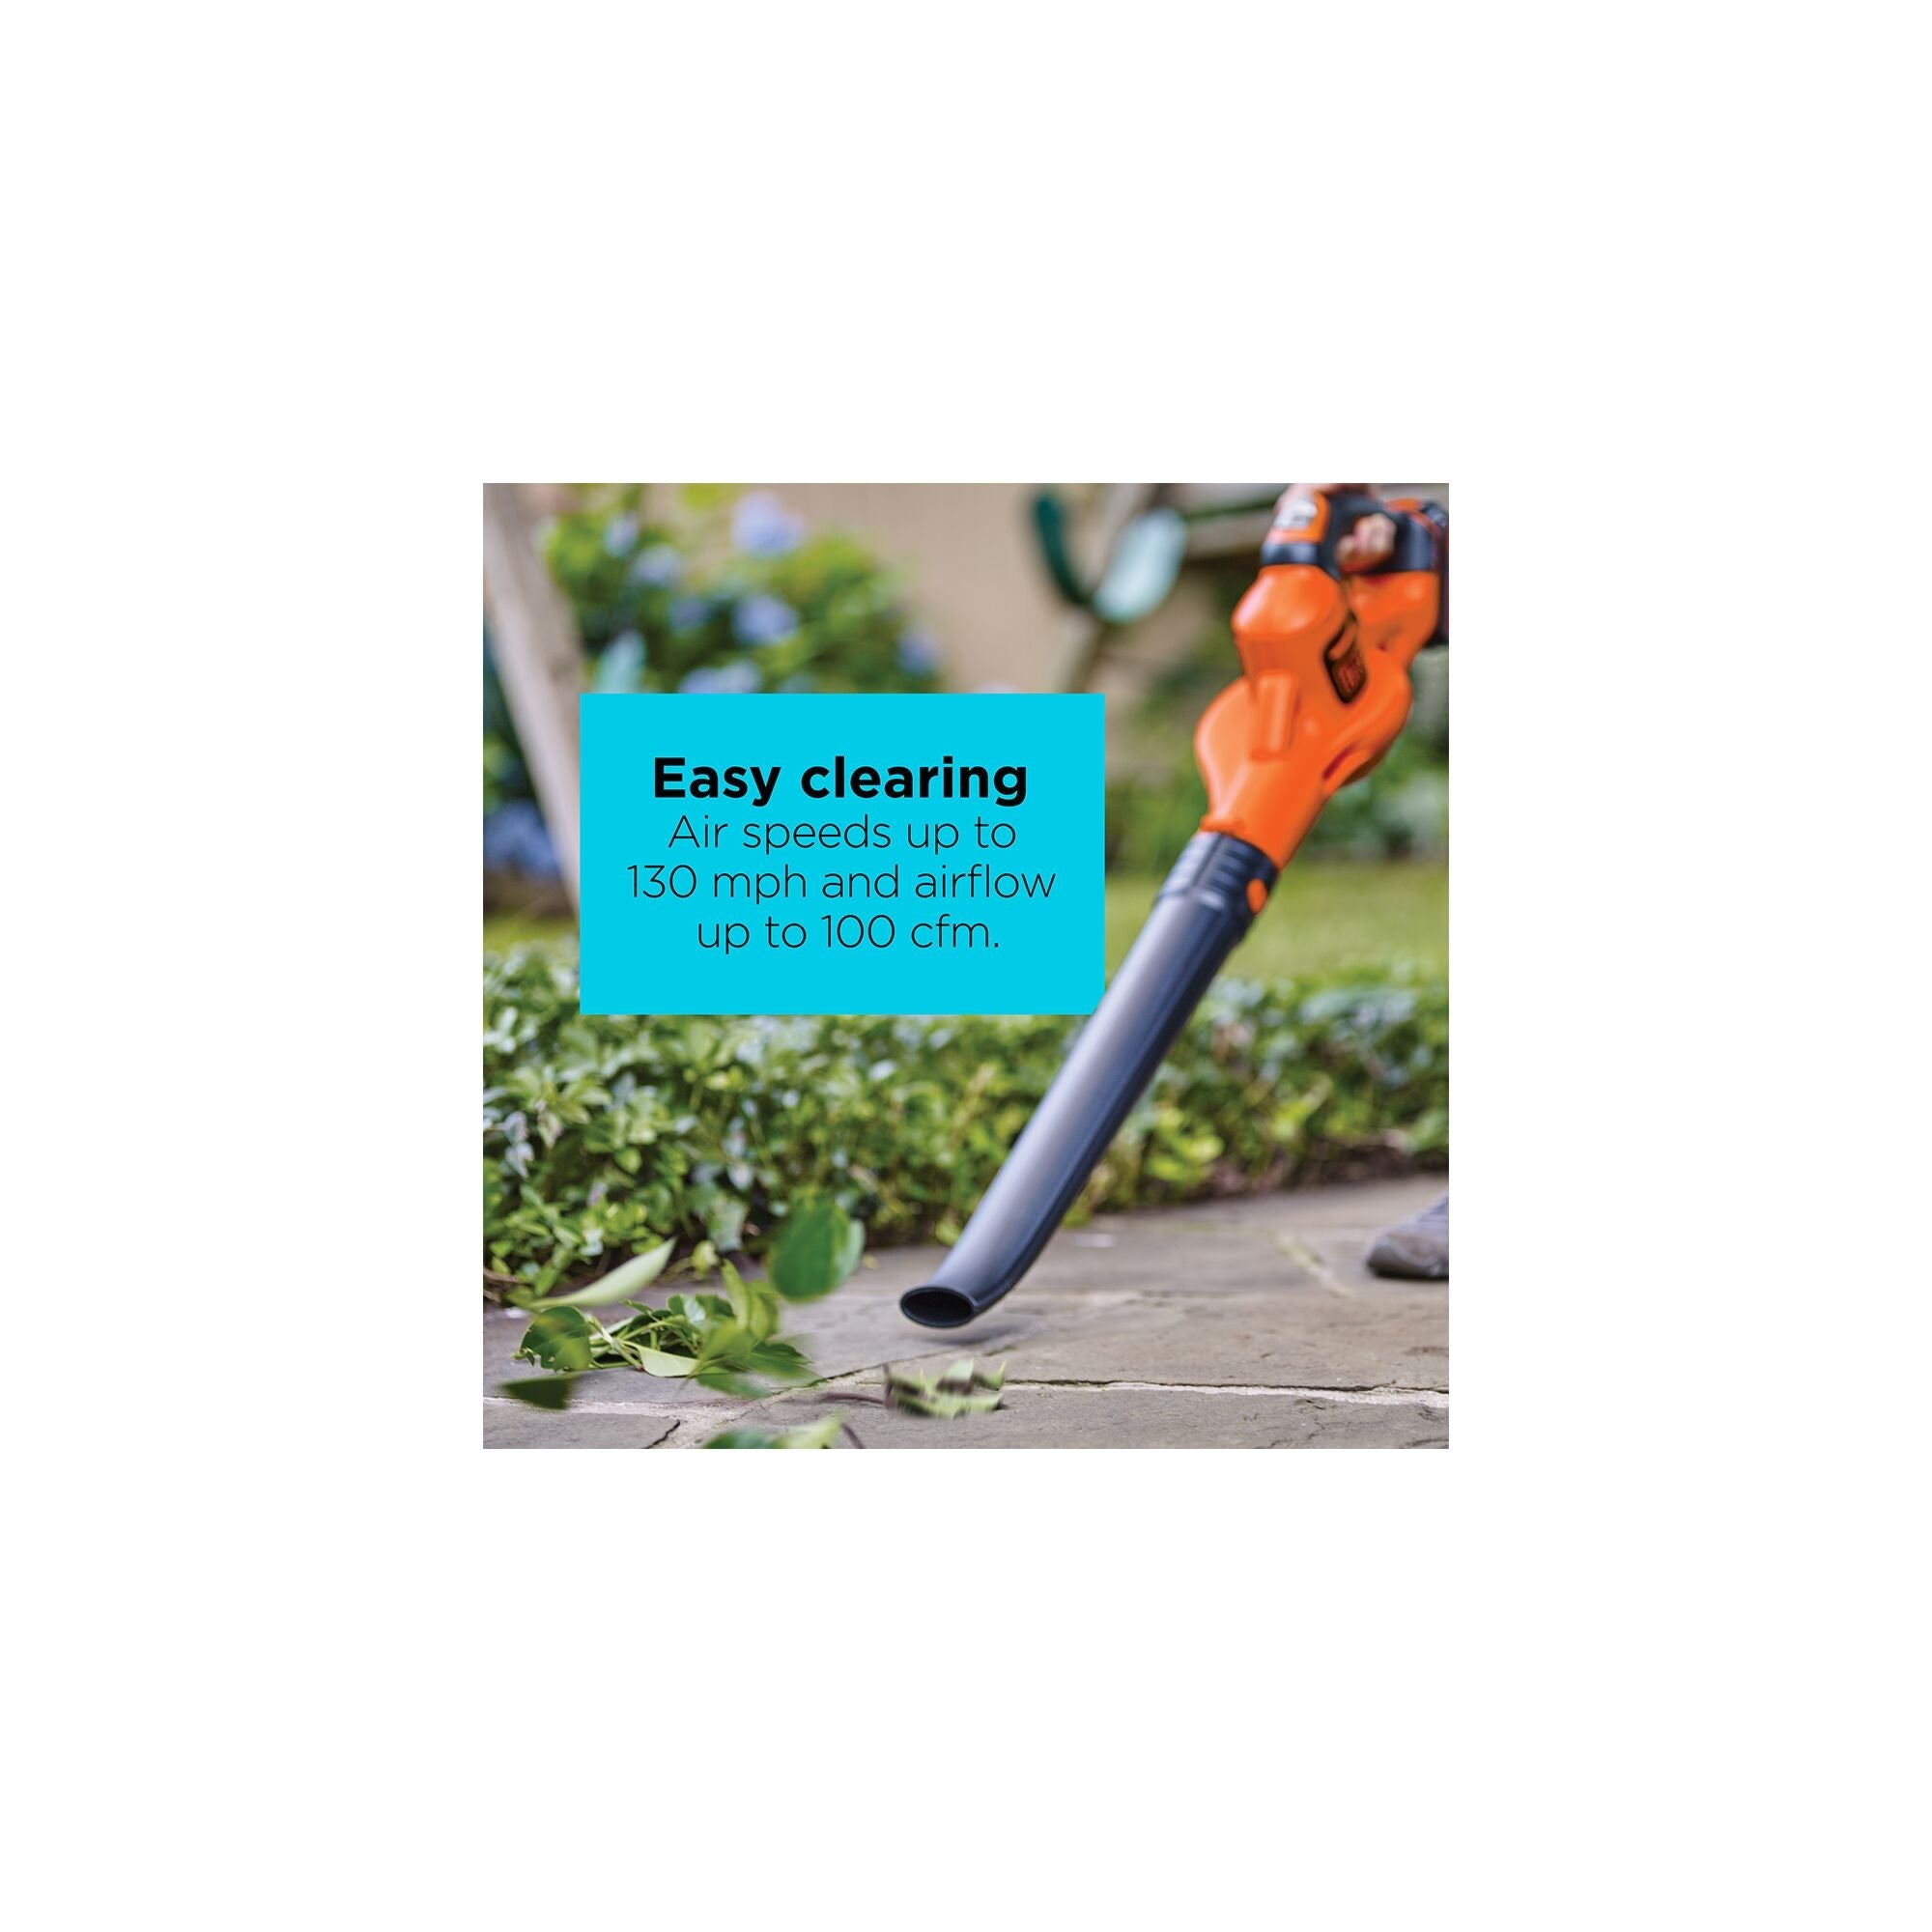 Black & Decker Cordless Sweeper With Power Boost - Pecos, TX - Gibson's  Hardware and Lumber